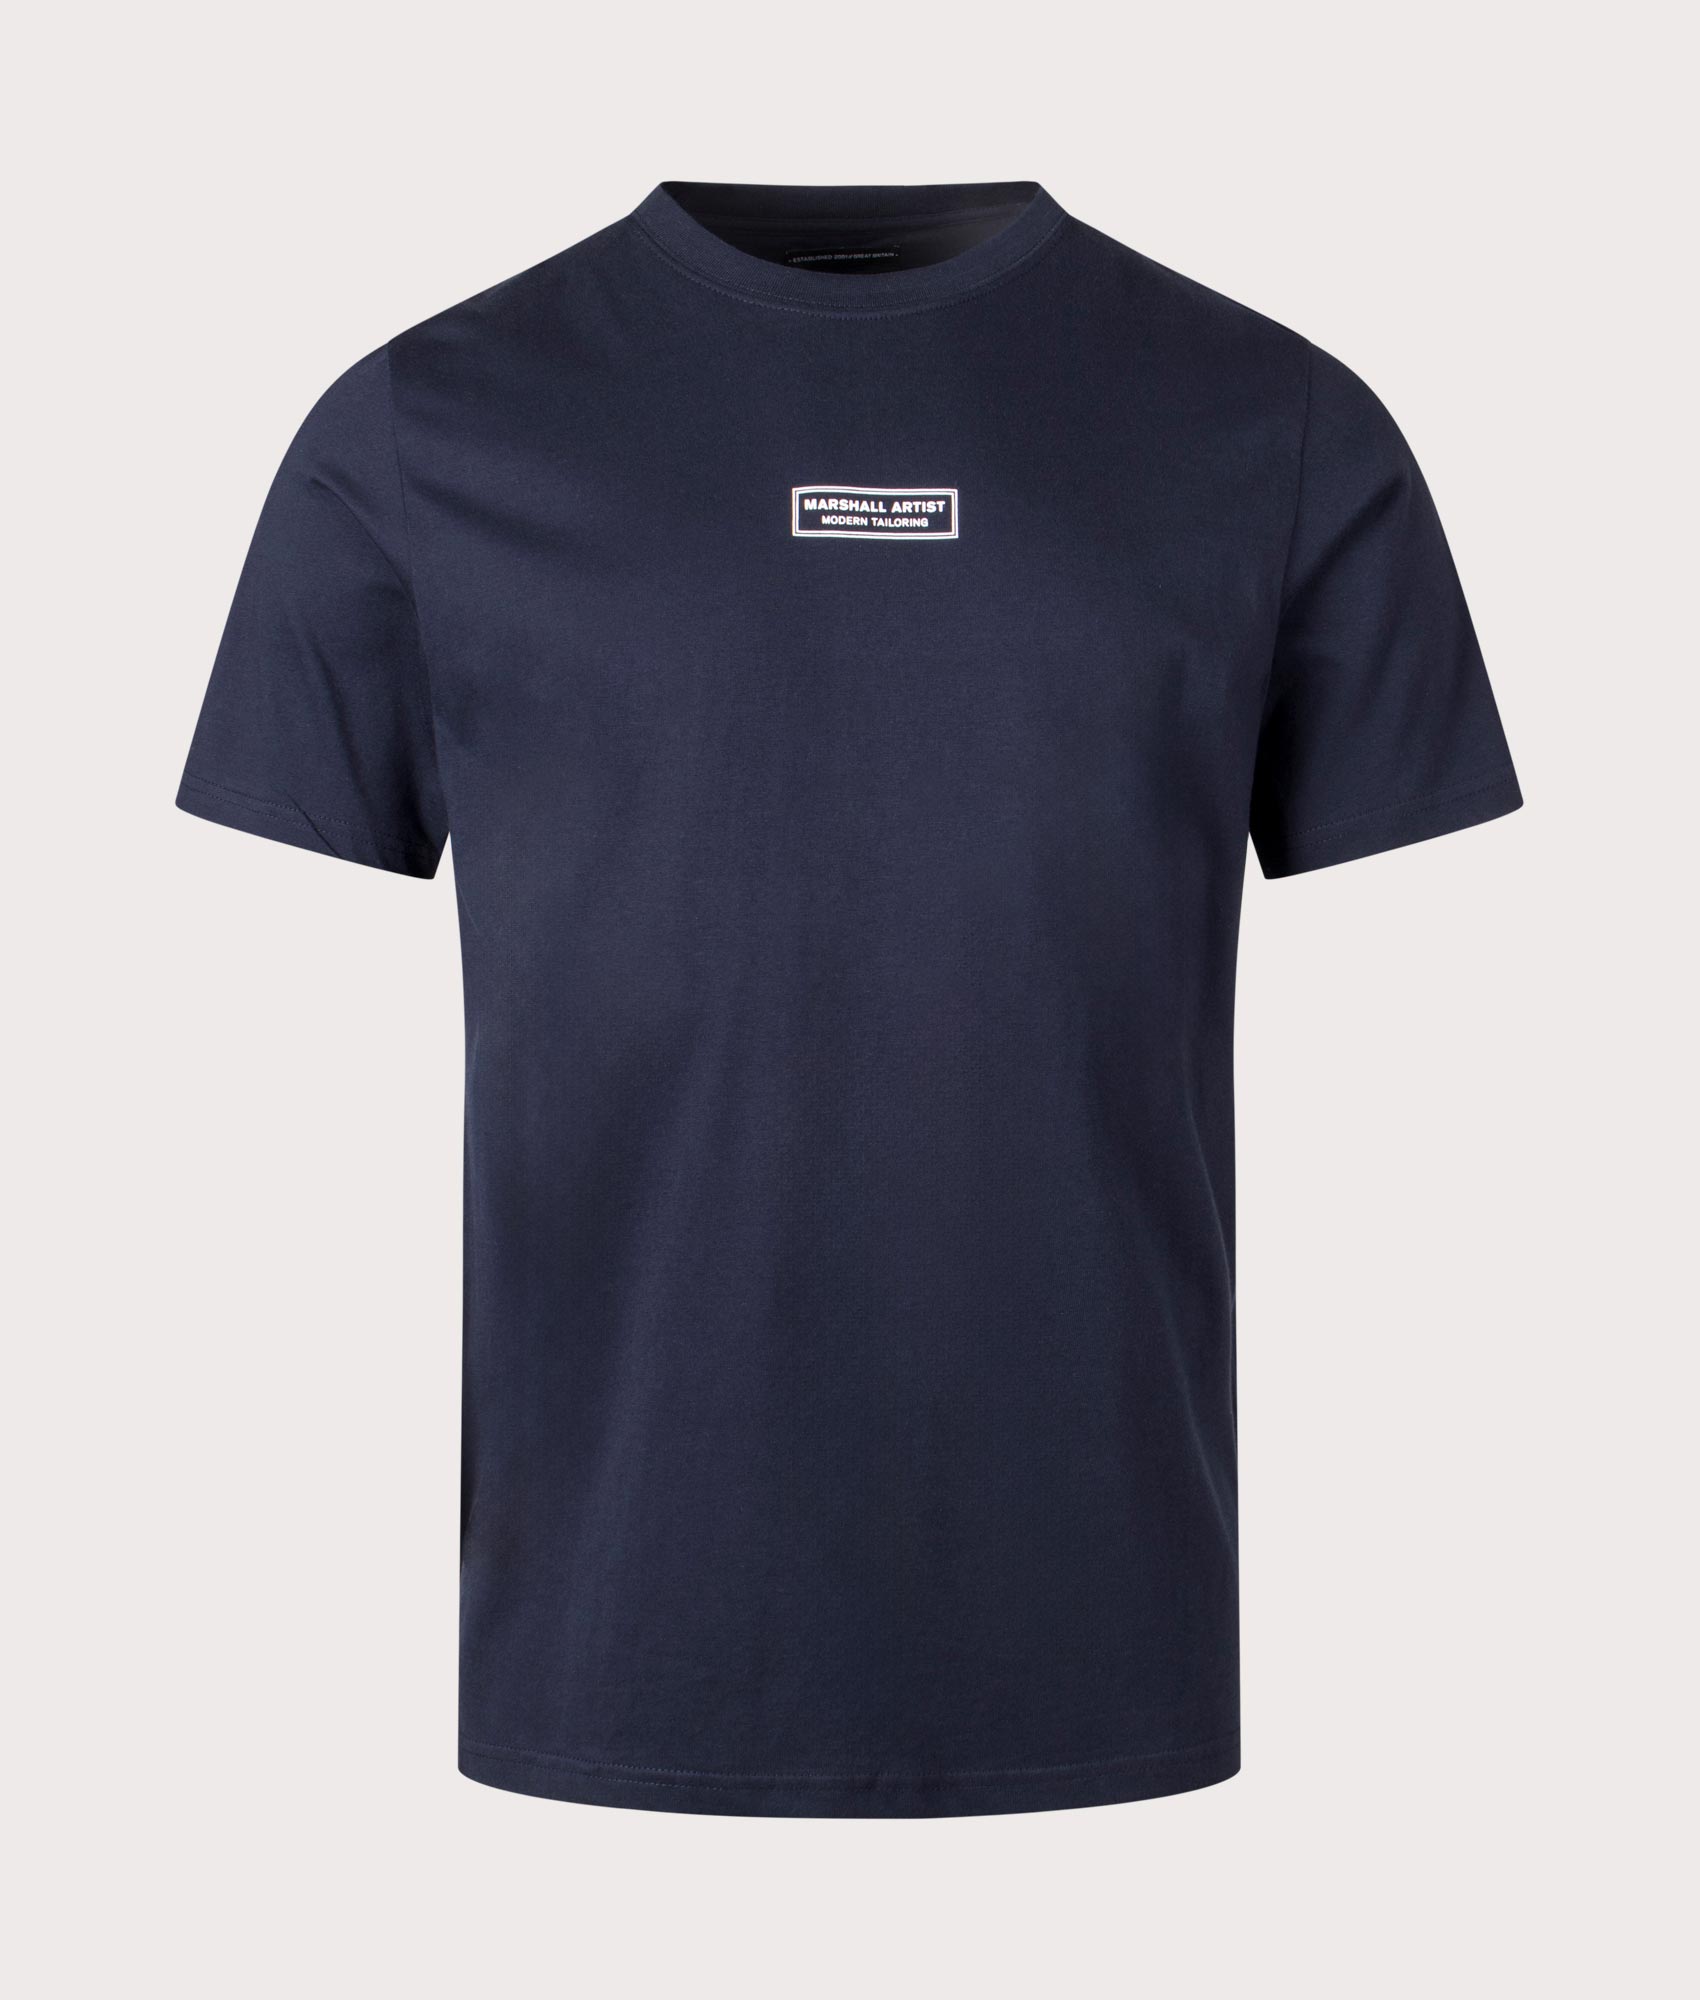 Marshall Artist Mens Injection T-Shirt - Colour: 003 Navy - Size: Large